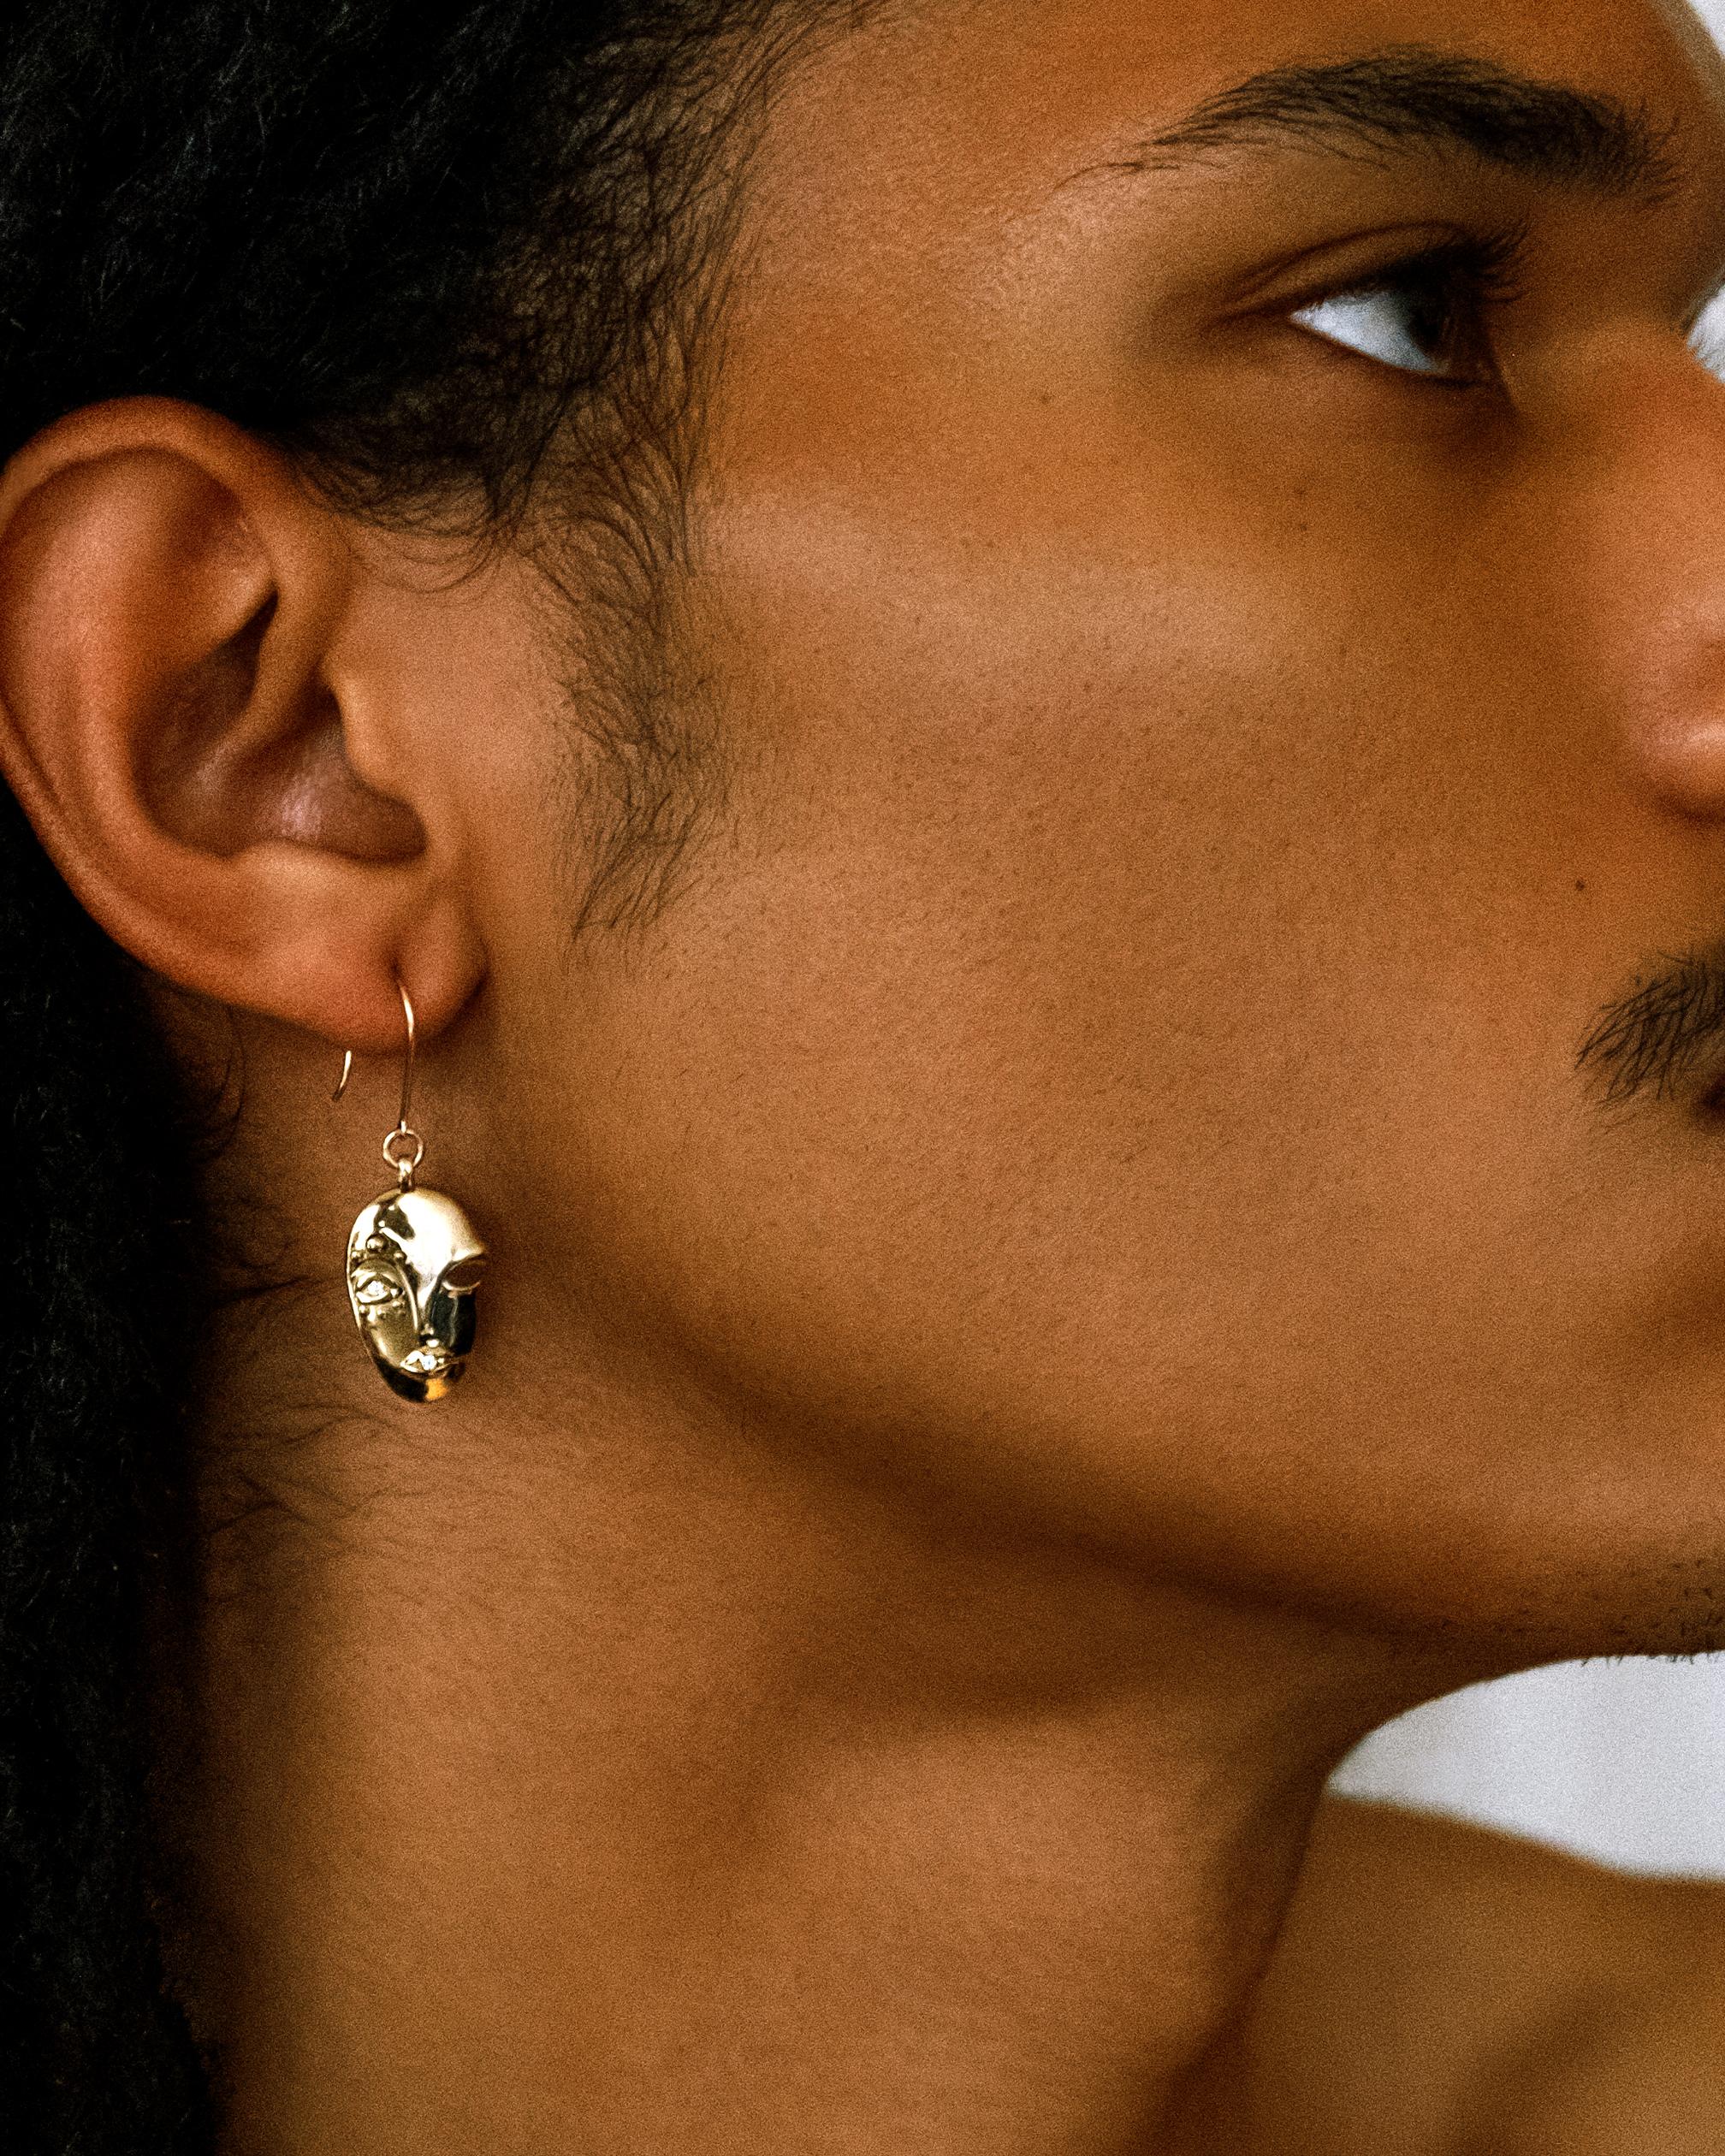 Sculptural Mask Drop Earrings situating Brancusi’s modernity in conversation with West African sculptural traditions. 1 inch drop on hook fastening for pierced ears.

- Materials-

G-H Diamonds, total weight: 0.04-carats